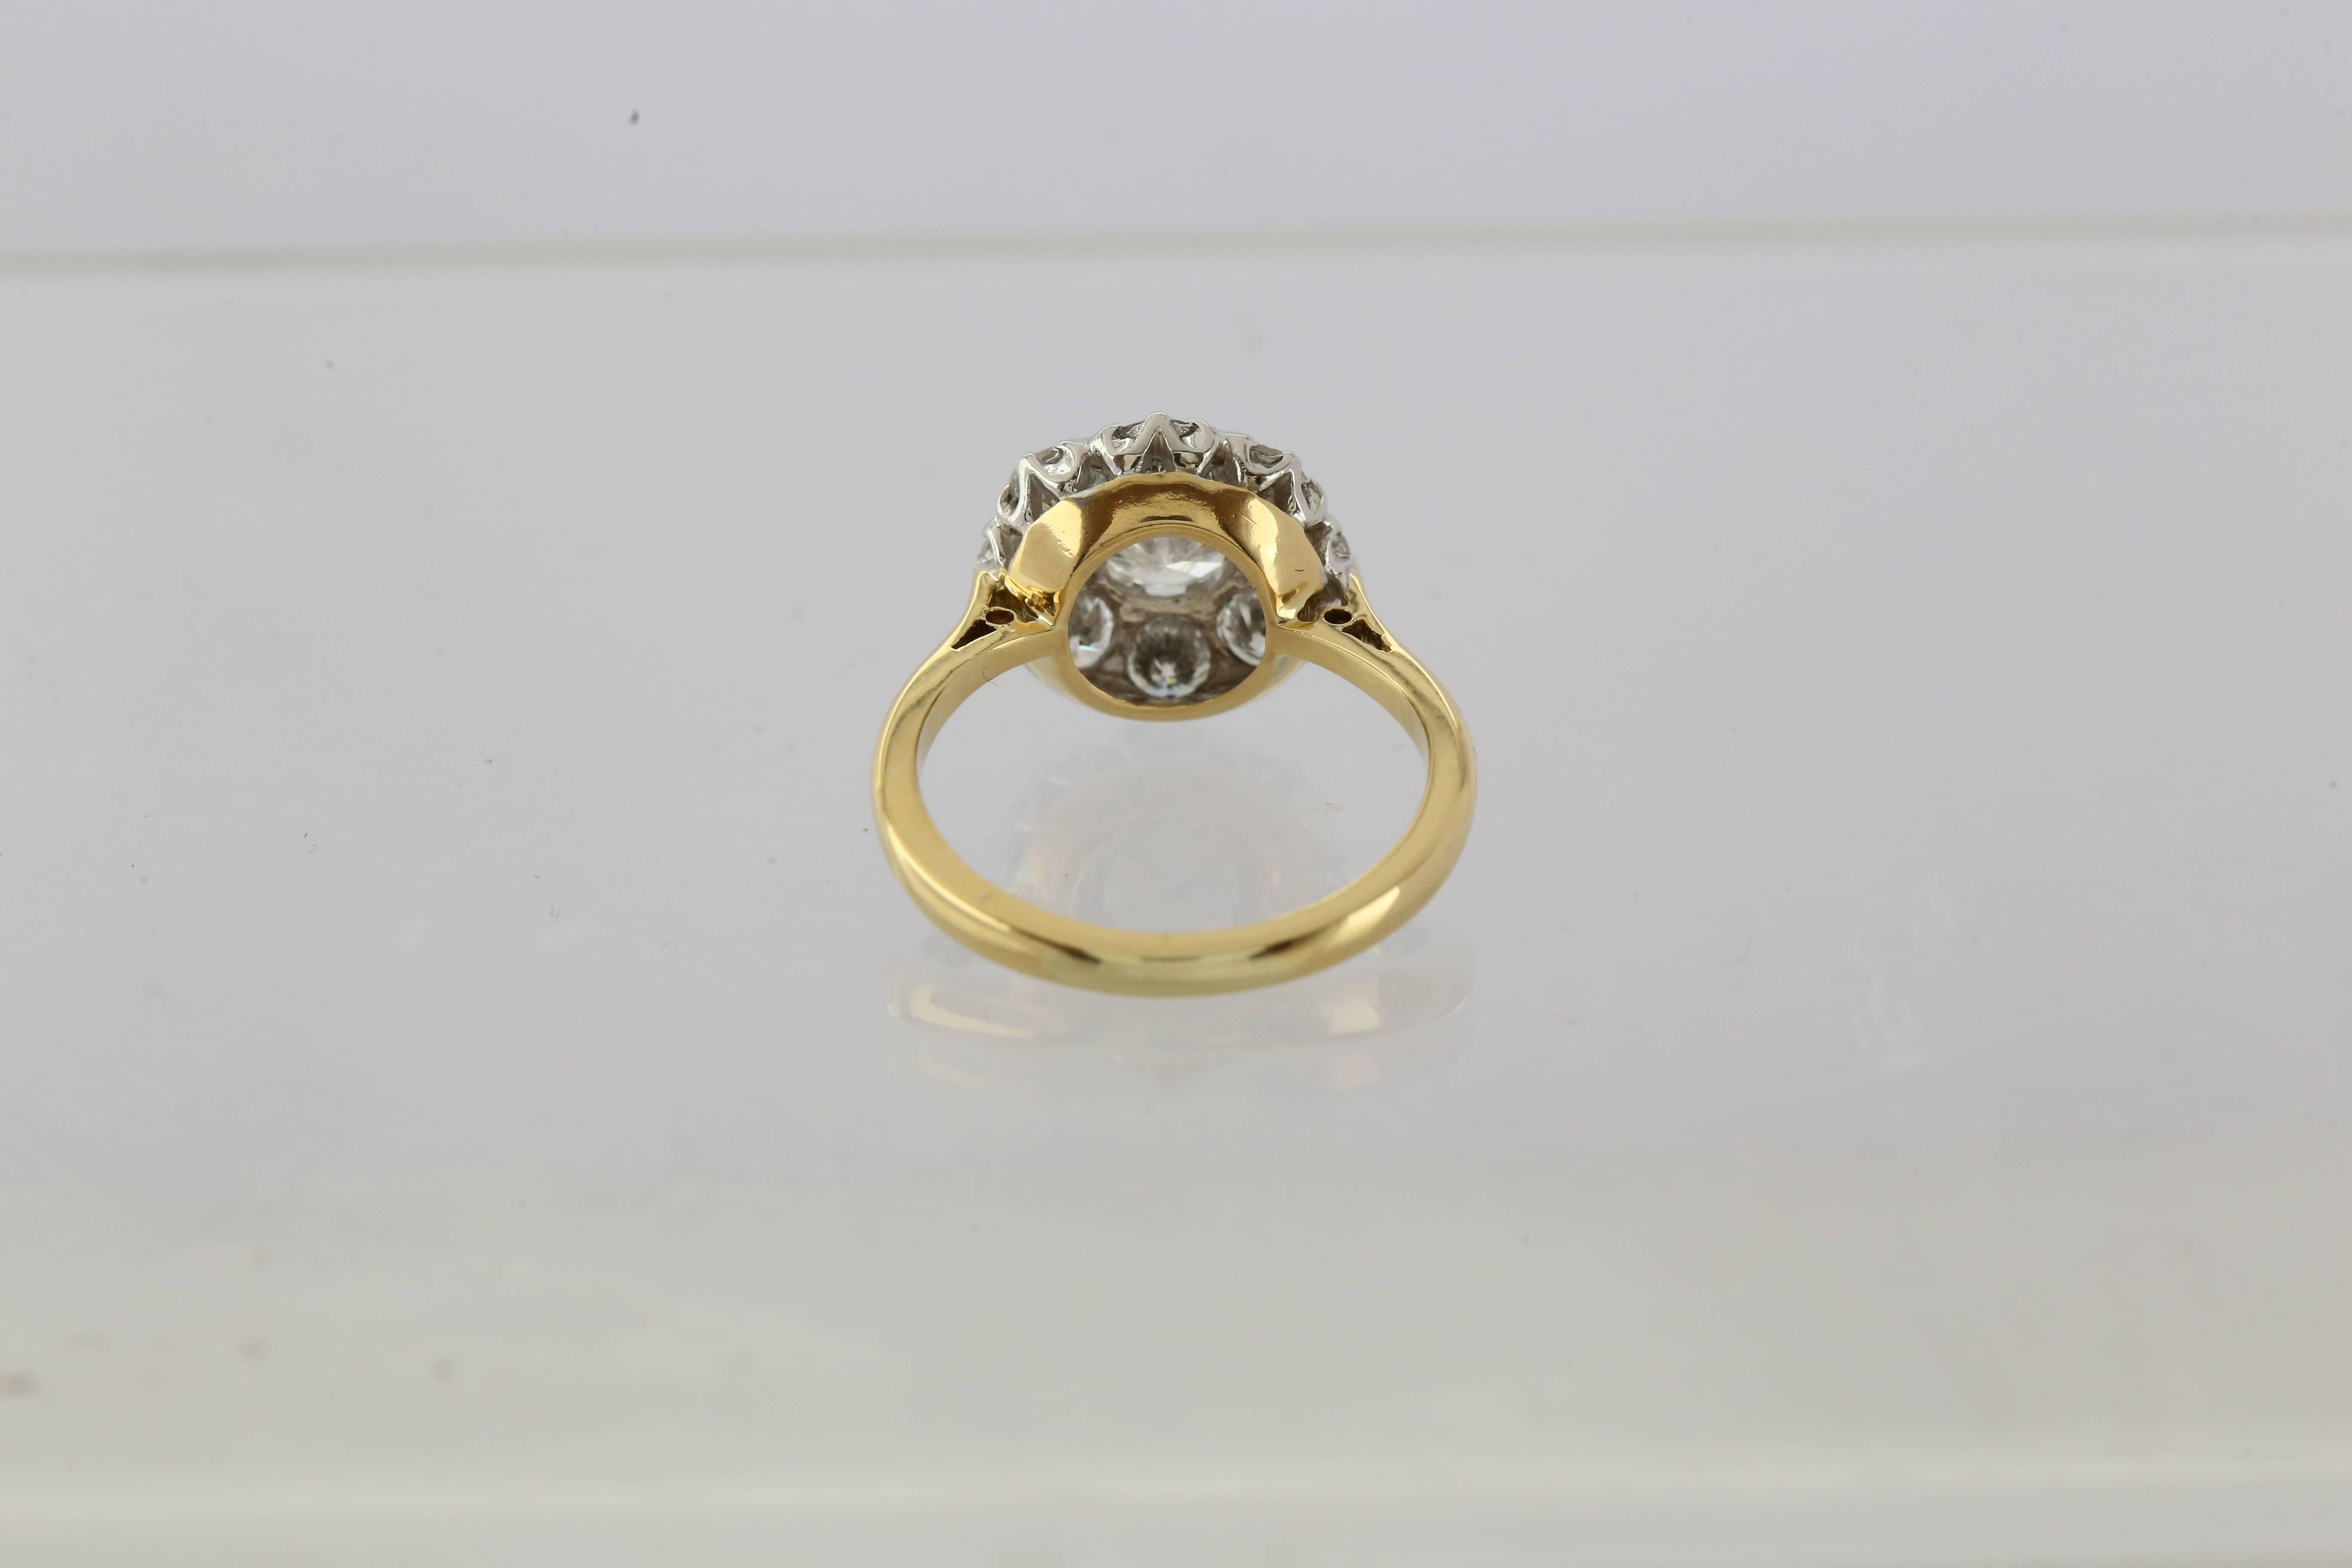 18ct Yellow Gold Diamond Cluster Ring Centre Diamond 0.90ct,Colour G, Clarity SI2, Cut VG set with 8 round brilliant diamonds total weight 1.20ct, Colour G-H, Clarity SI, Cut VG, Weight 7,94grams WGI9624108337 CERTIFICATED
Size M